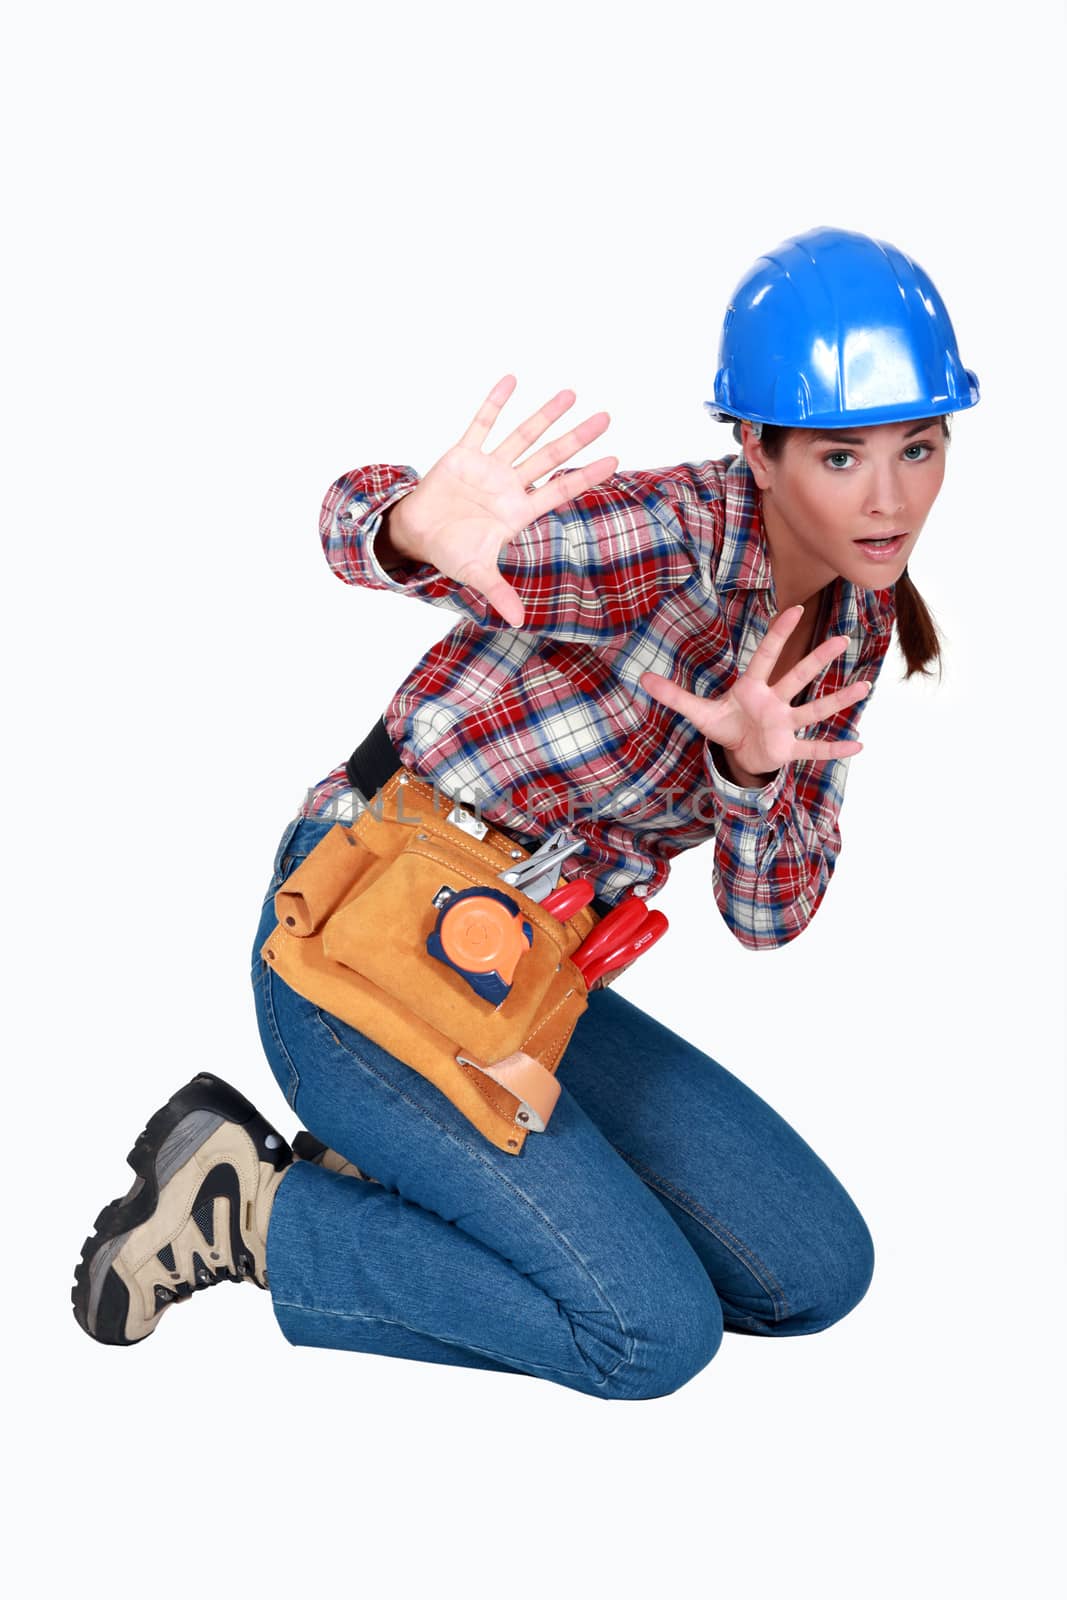 A scared female construction worker. by phovoir